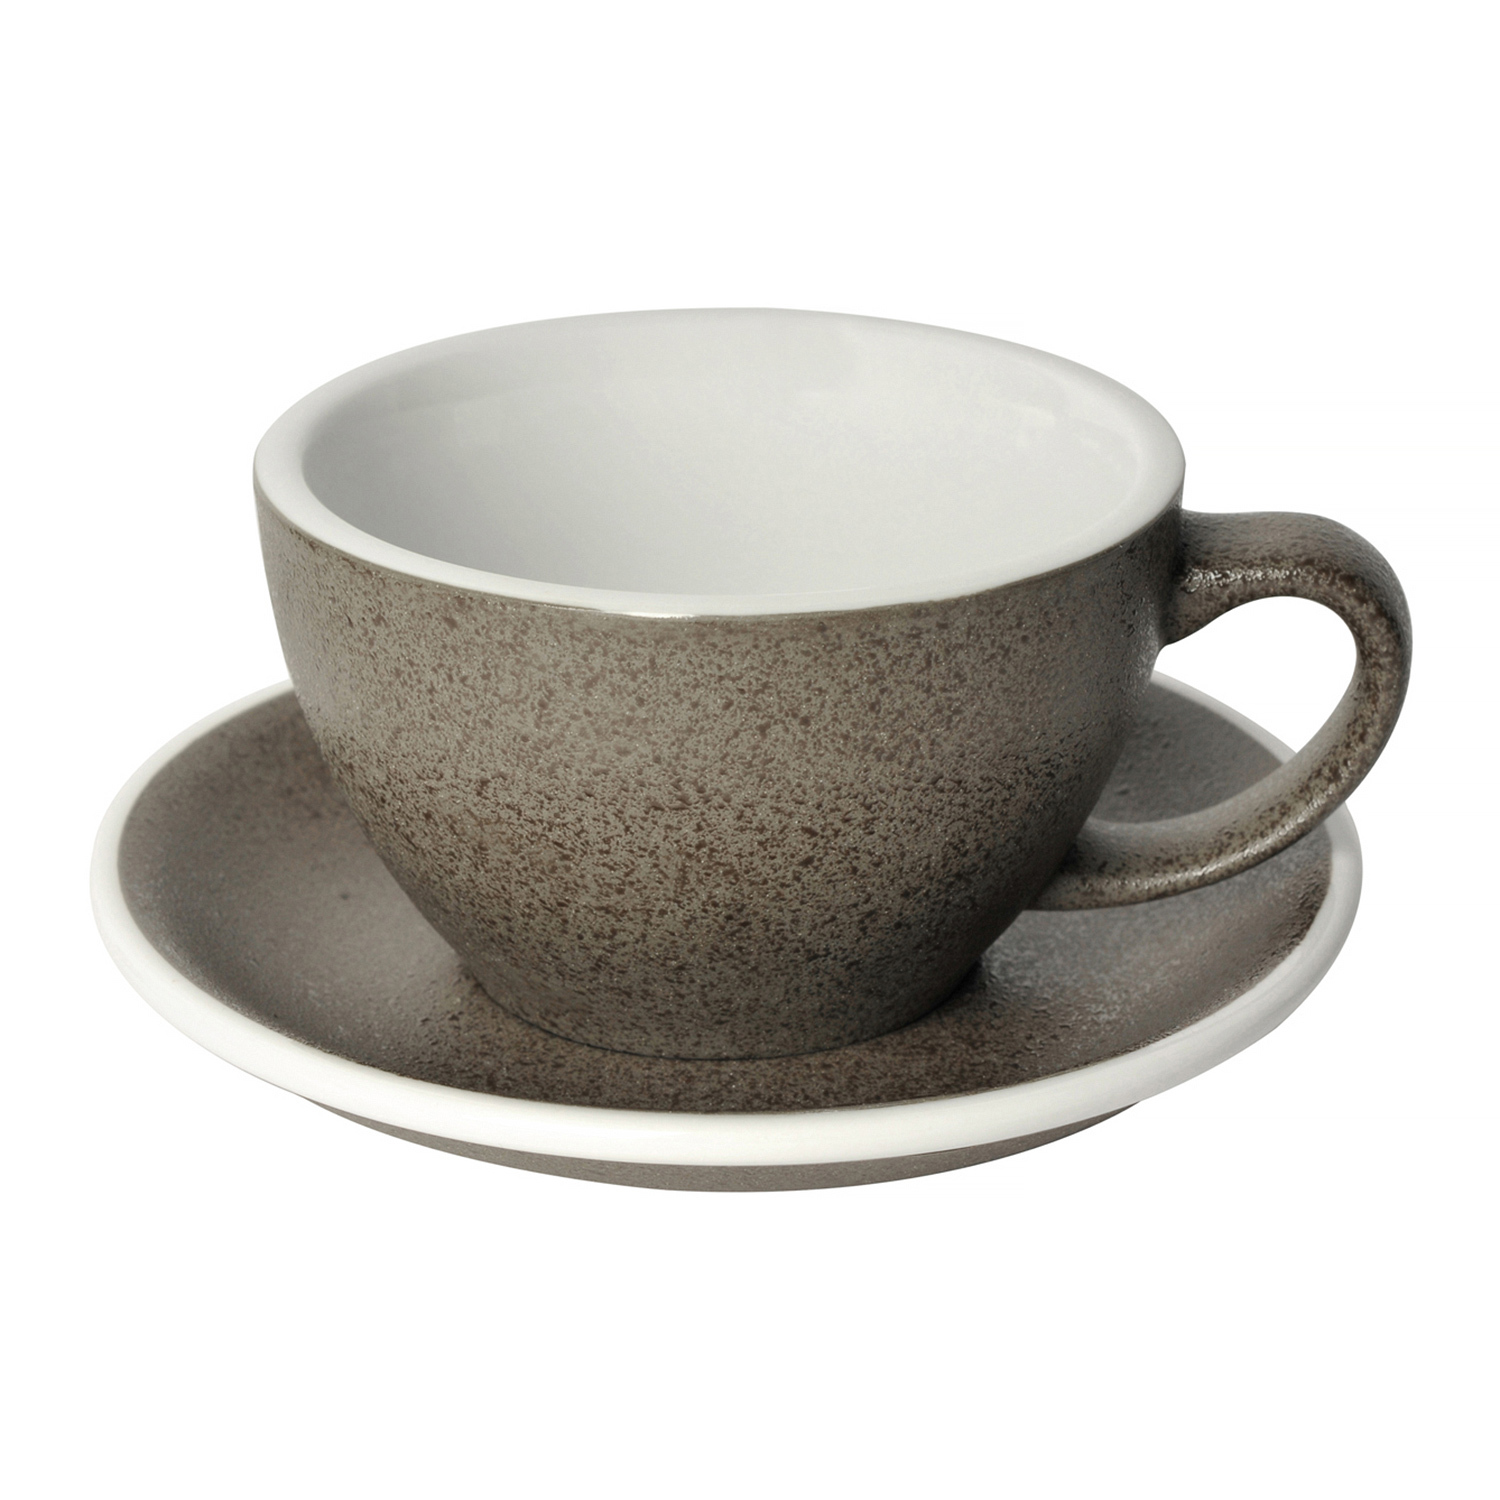 Loveramics Egg - Cafe Latte 300 ml Cup and Saucer  - Granite